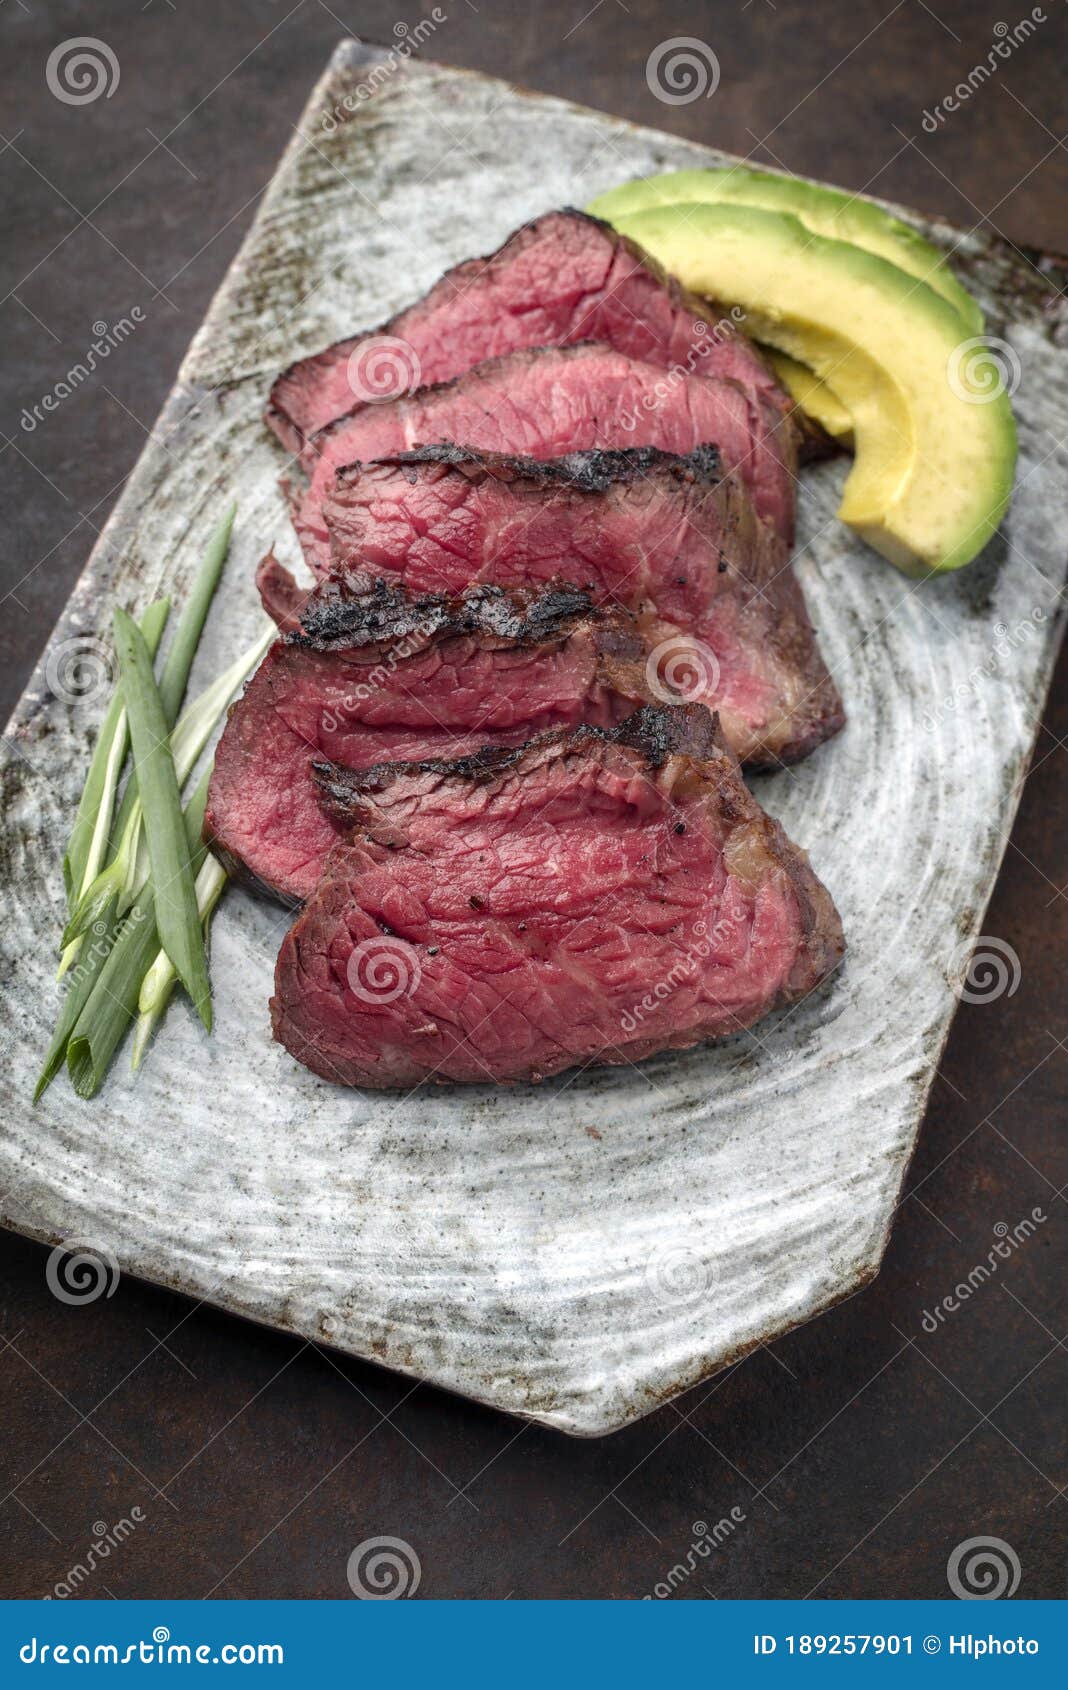 Traditional Japanese Kobe Beef Steak Filet with Avocado on a Design ...